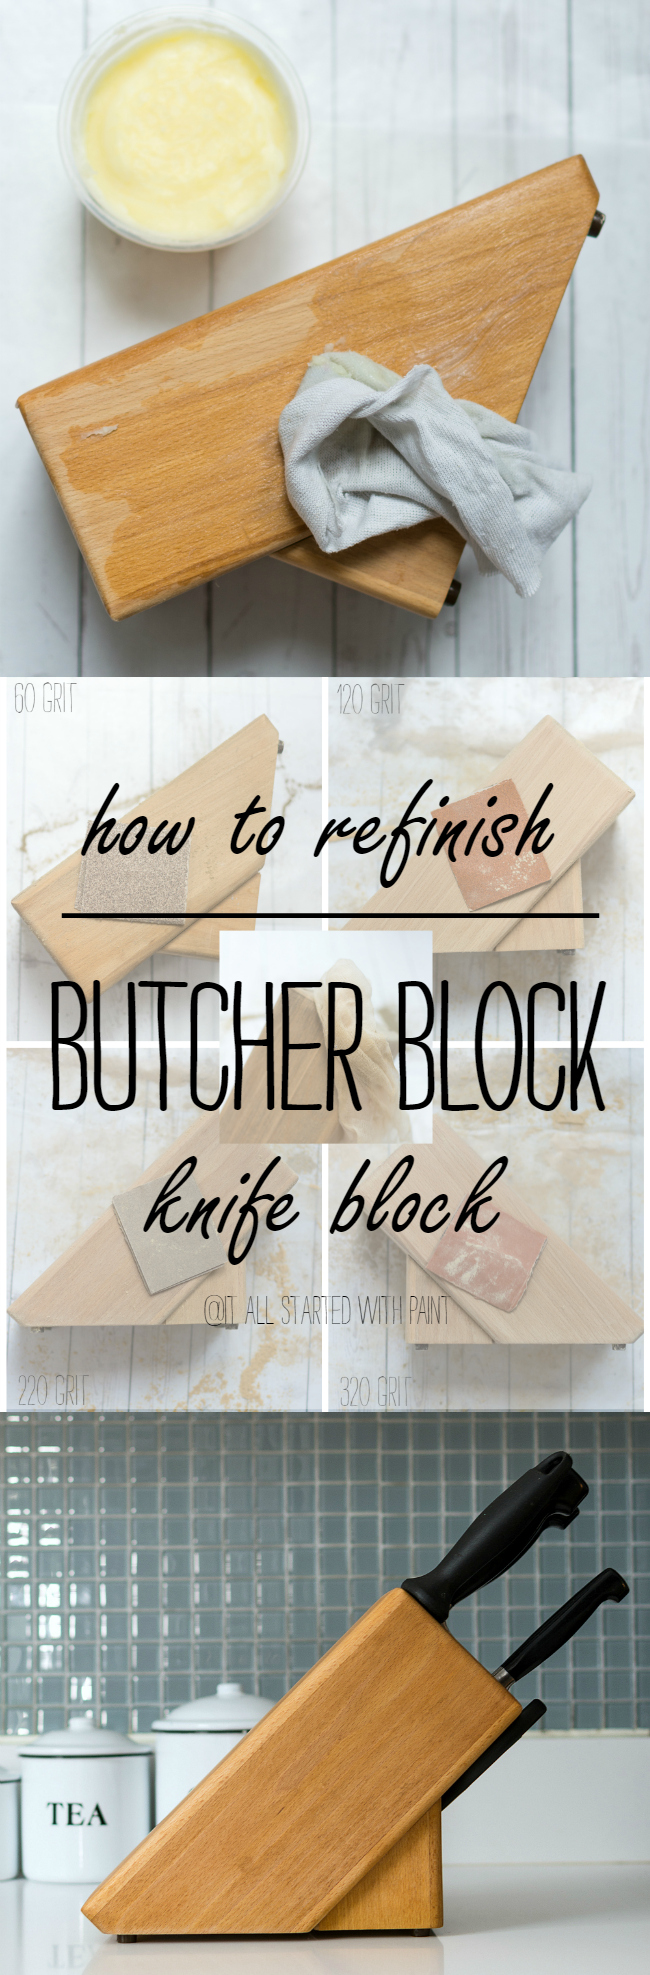 How To Refinish A Butcher Block Knife Block